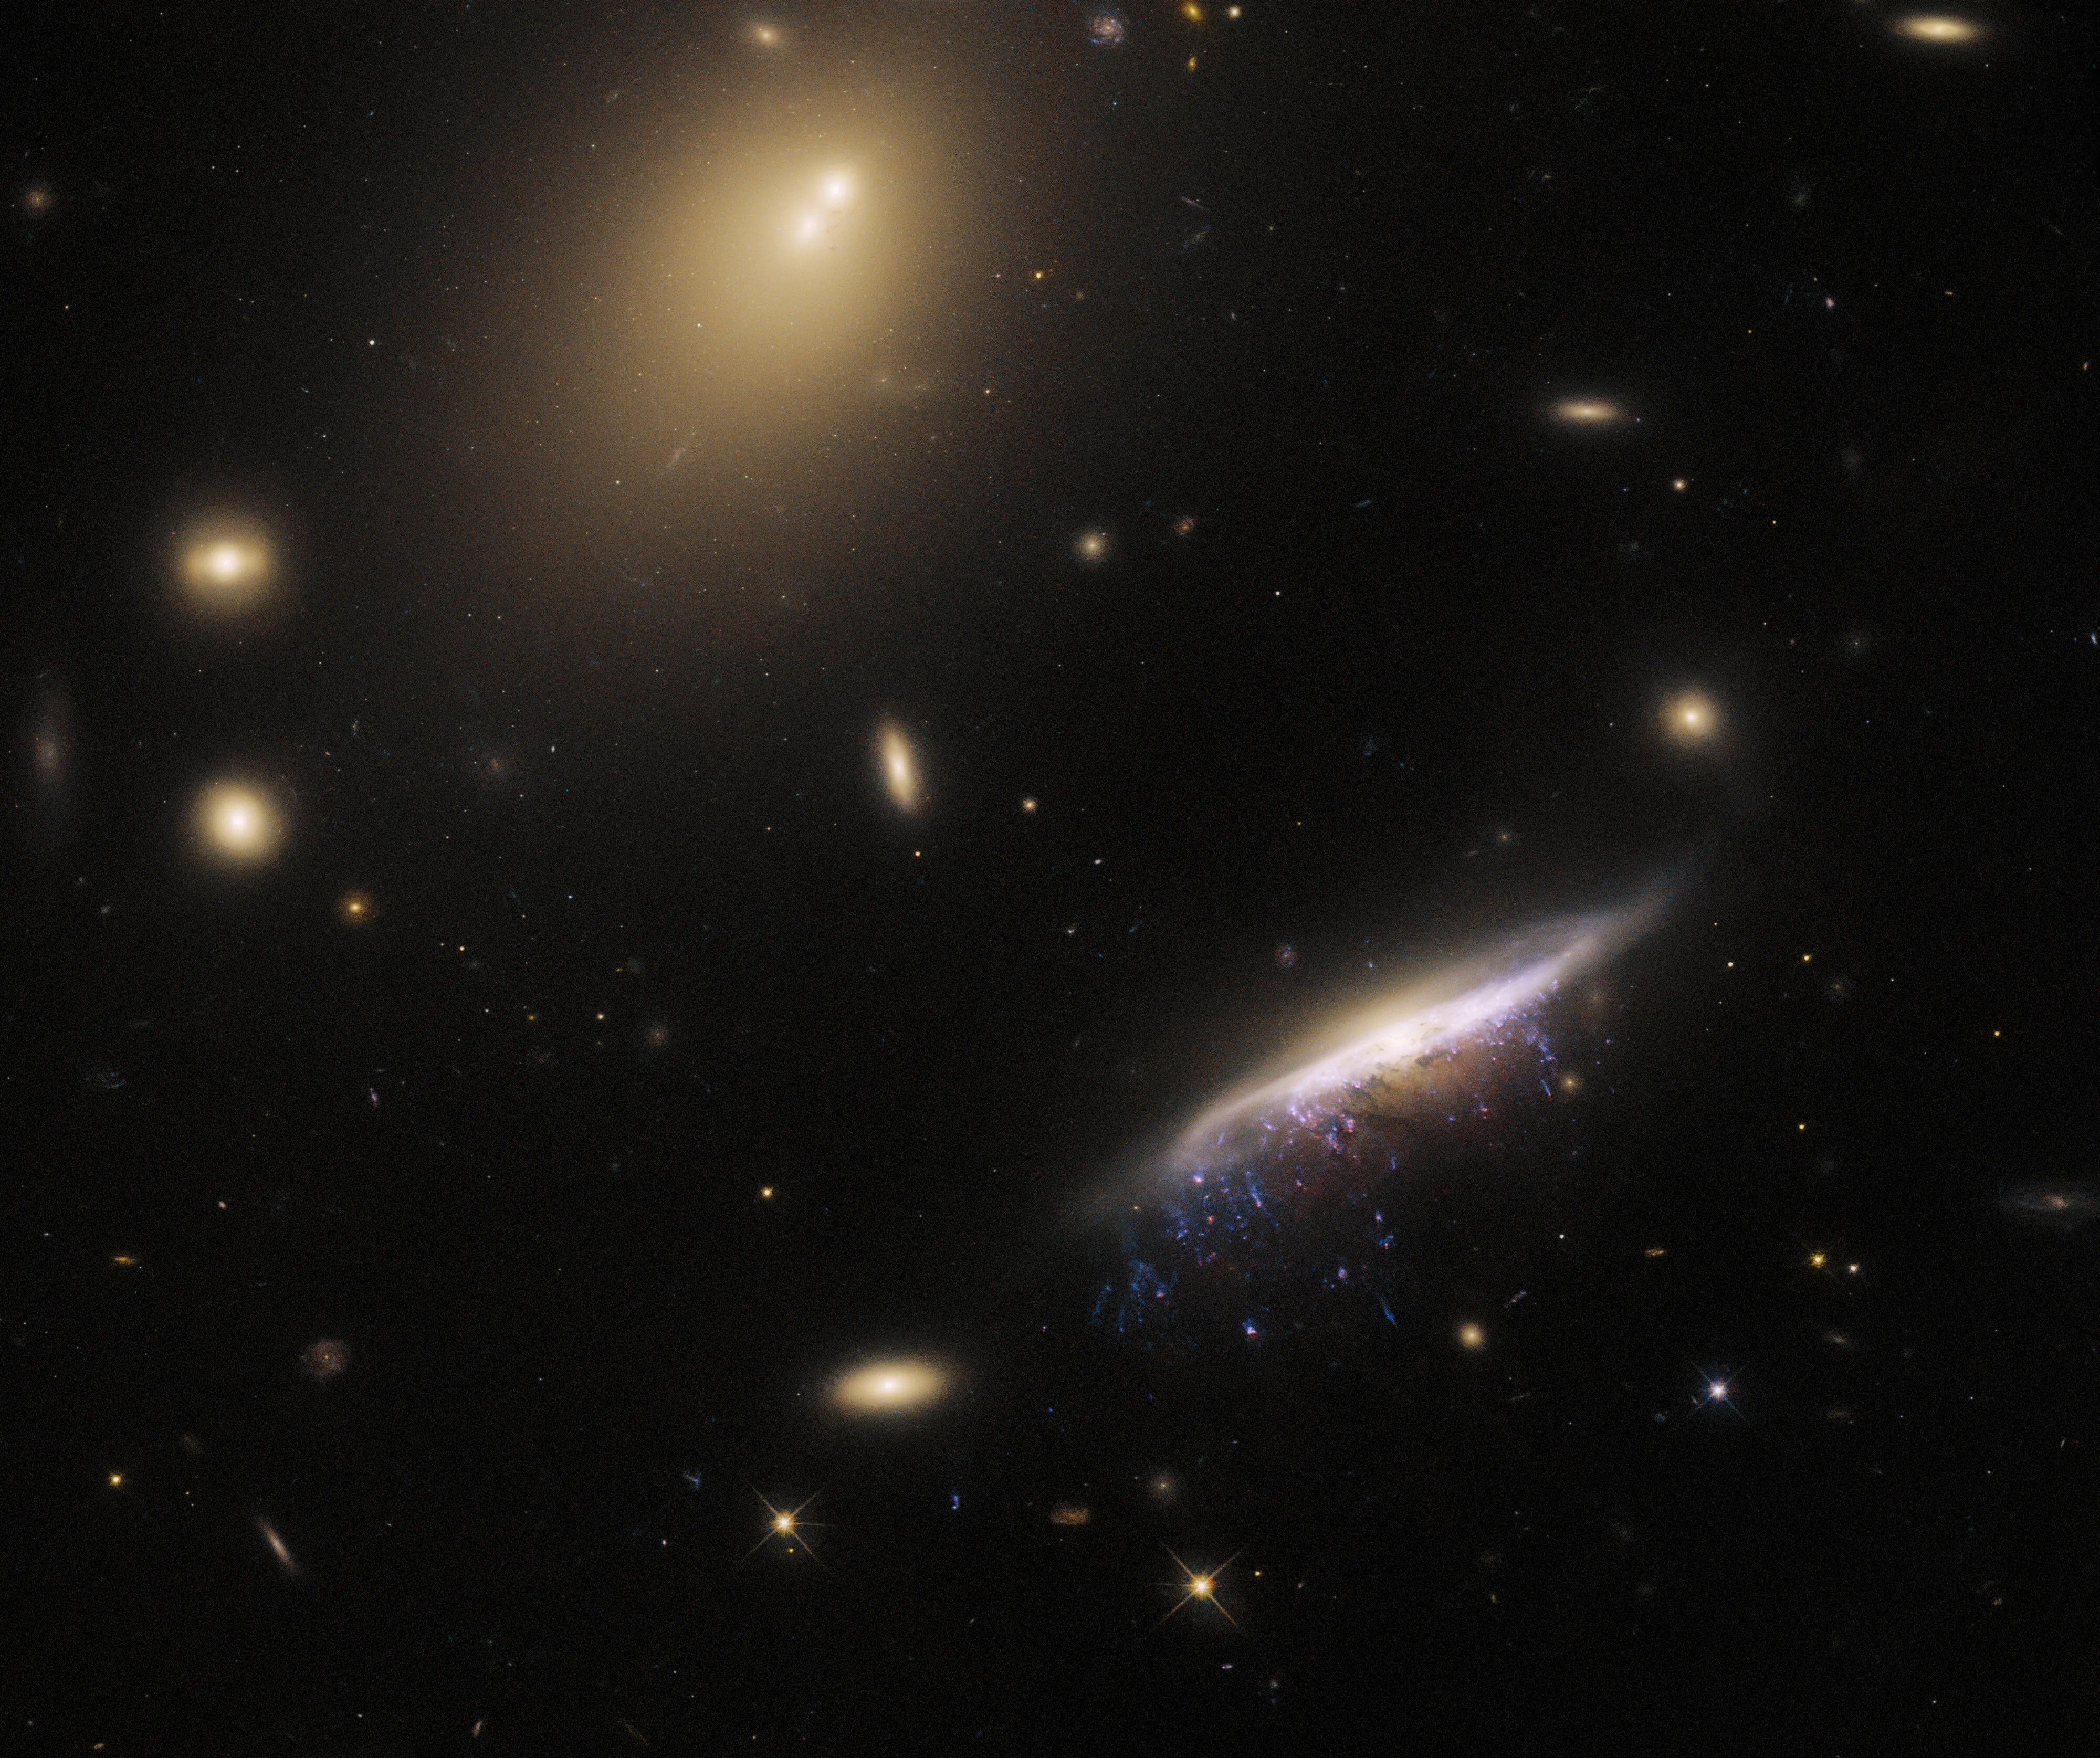 A thin spiral galaxy is seen edge-on in the lower right. Its bulge and arms are very bright, mixing reddish and bluish light. Patchy blue trails extend below it, resembling tentacles, made from star-forming regions. Six small, reddish elliptical galaxies are scattered around. A very large elliptical galaxy with two cores sits by the top of the frame.